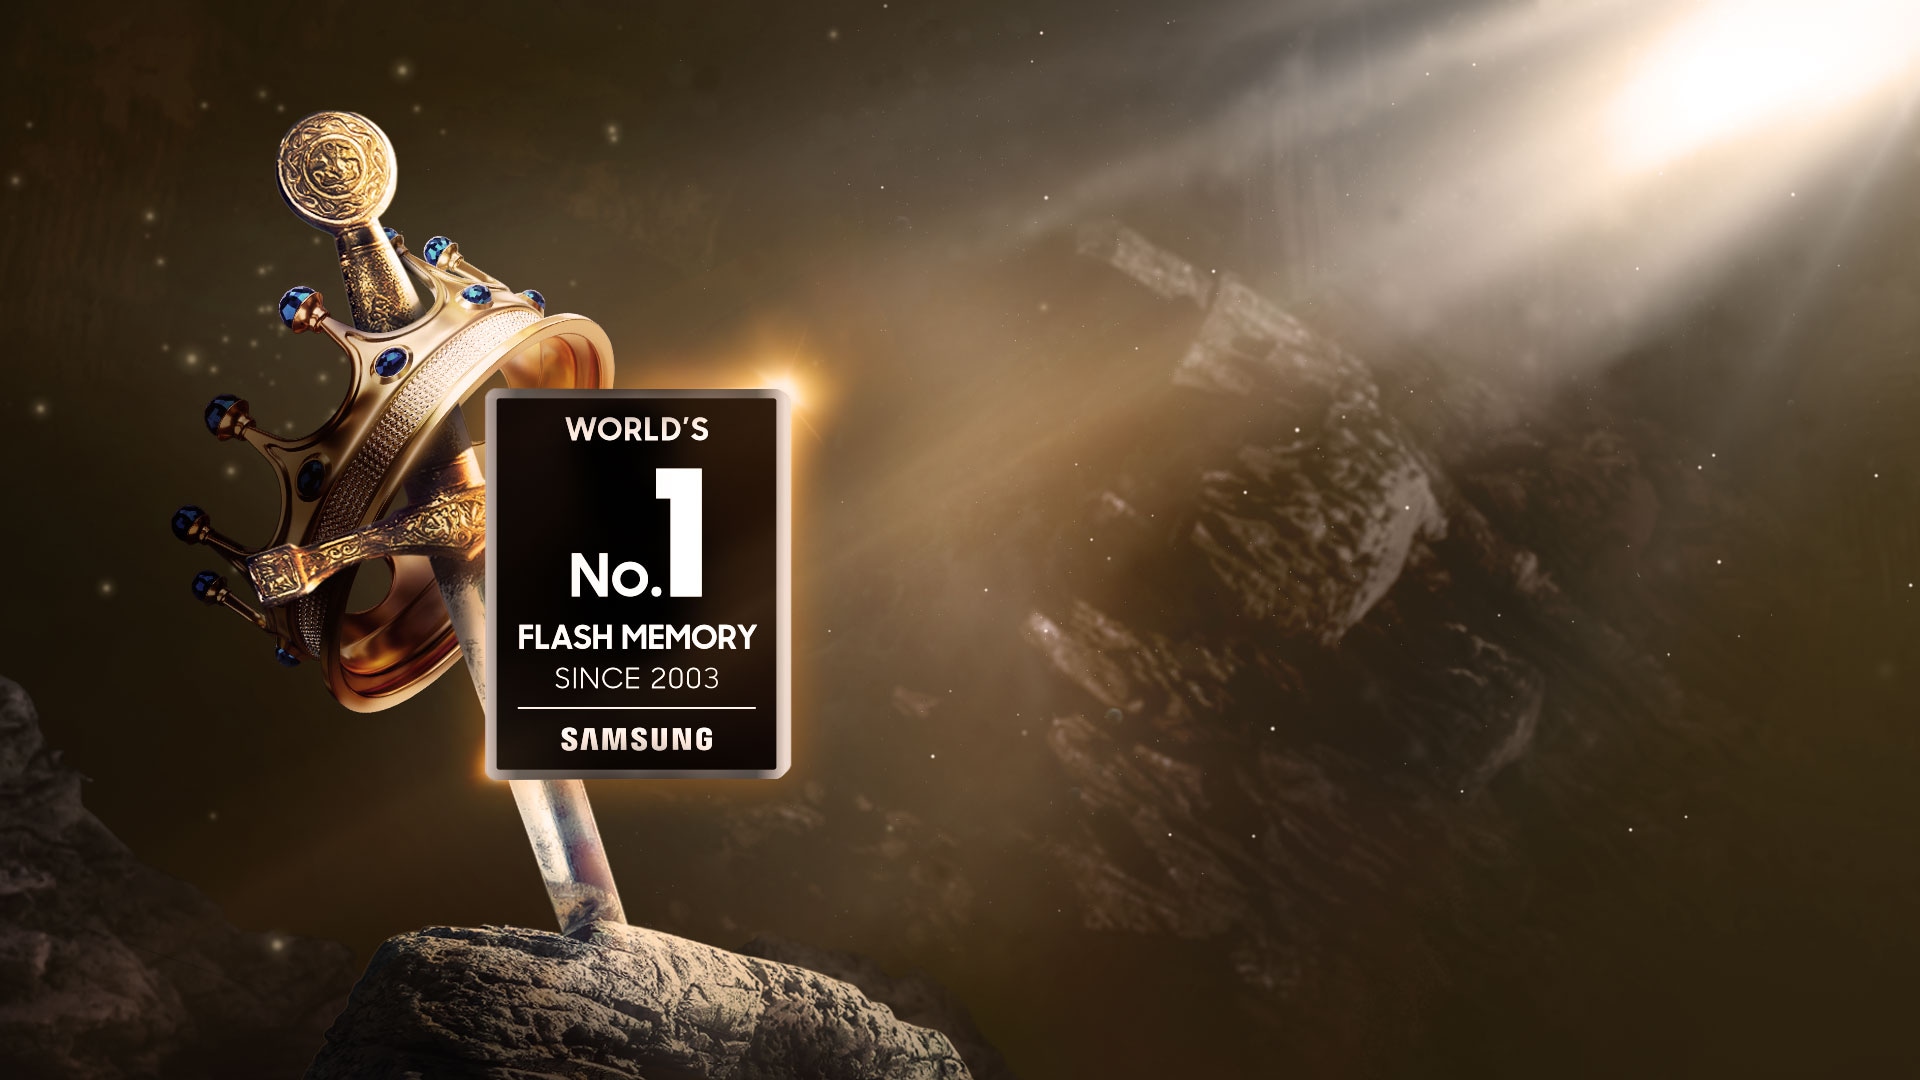 In front of a crown and a sword in a stone, a logo certifies Samsung as the world’s no.1 flash memory brand.